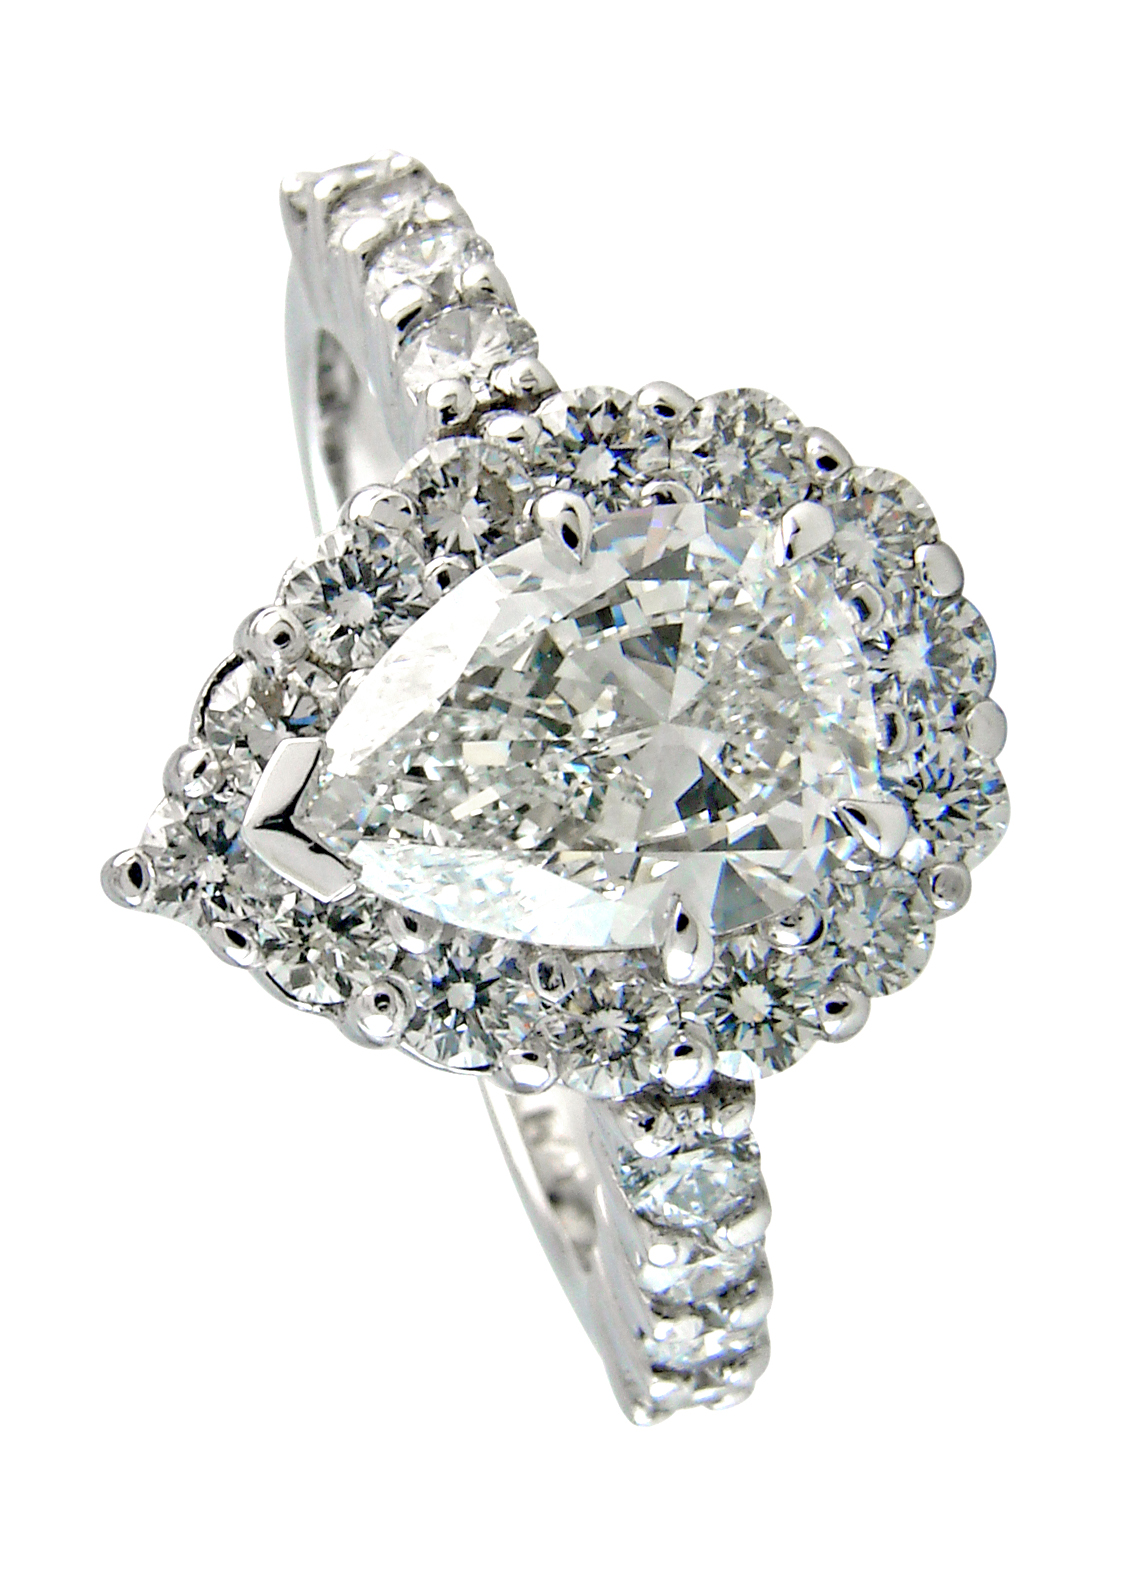 Pear cut diamond with diamond pavé halo and band in white gold 18k